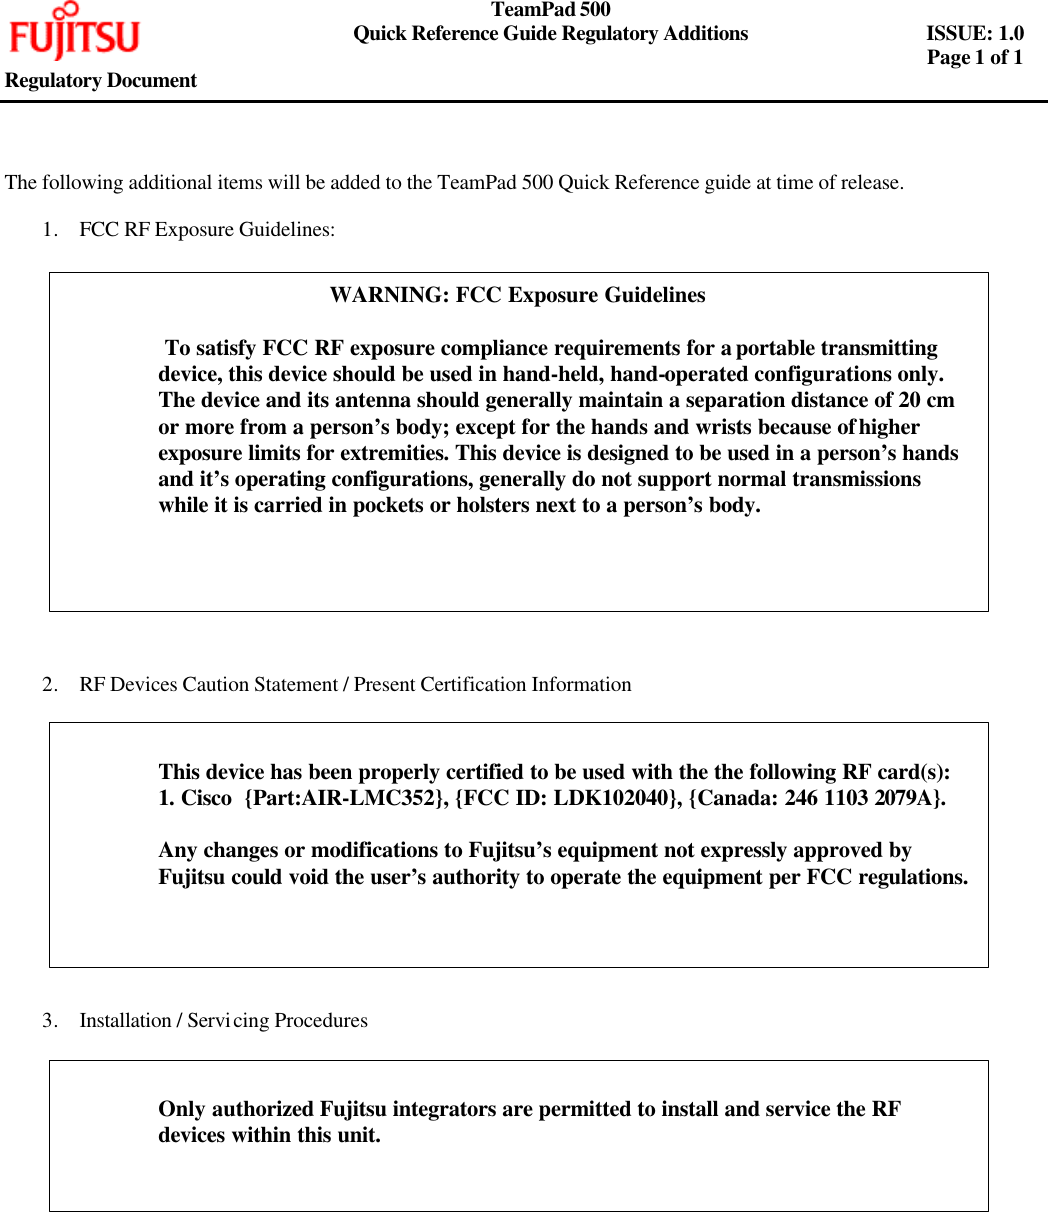     TeamPad 500       Quick Reference Guide Regulatory Additions   ISSUE: 1.0        Page 1 of 1   Regulatory Document     The following additional items will be added to the TeamPad 500 Quick Reference guide at time of release.  1. FCC RF Exposure Guidelines:                    2. RF Devices Caution Statement / Present Certification Information              3. Installation / Servicing Procedures               WARNING: FCC Exposure Guidelines   To satisfy FCC RF exposure compliance requirements for a portable transmitting device, this device should be used in hand-held, hand-operated configurations only. The device and its antenna should generally maintain a separation distance of 20 cm or more from a person’s body; except for the hands and wrists because of higher exposure limits for extremities. This device is designed to be used in a person’s hands and it’s operating configurations, generally do not support normal transmissions while it is carried in pockets or holsters next to a person’s body.   This device has been properly certified to be used with the the following RF card(s): 1. Cisco  {Part:AIR-LMC352}, {FCC ID: LDK102040}, {Canada: 246 1103 2079A}.  Any changes or modifications to Fujitsu’s equipment not expressly approved by Fujitsu could void the user’s authority to operate the equipment per FCC regulations.  Only authorized Fujitsu integrators are permitted to install and service the RF devices within this unit.  